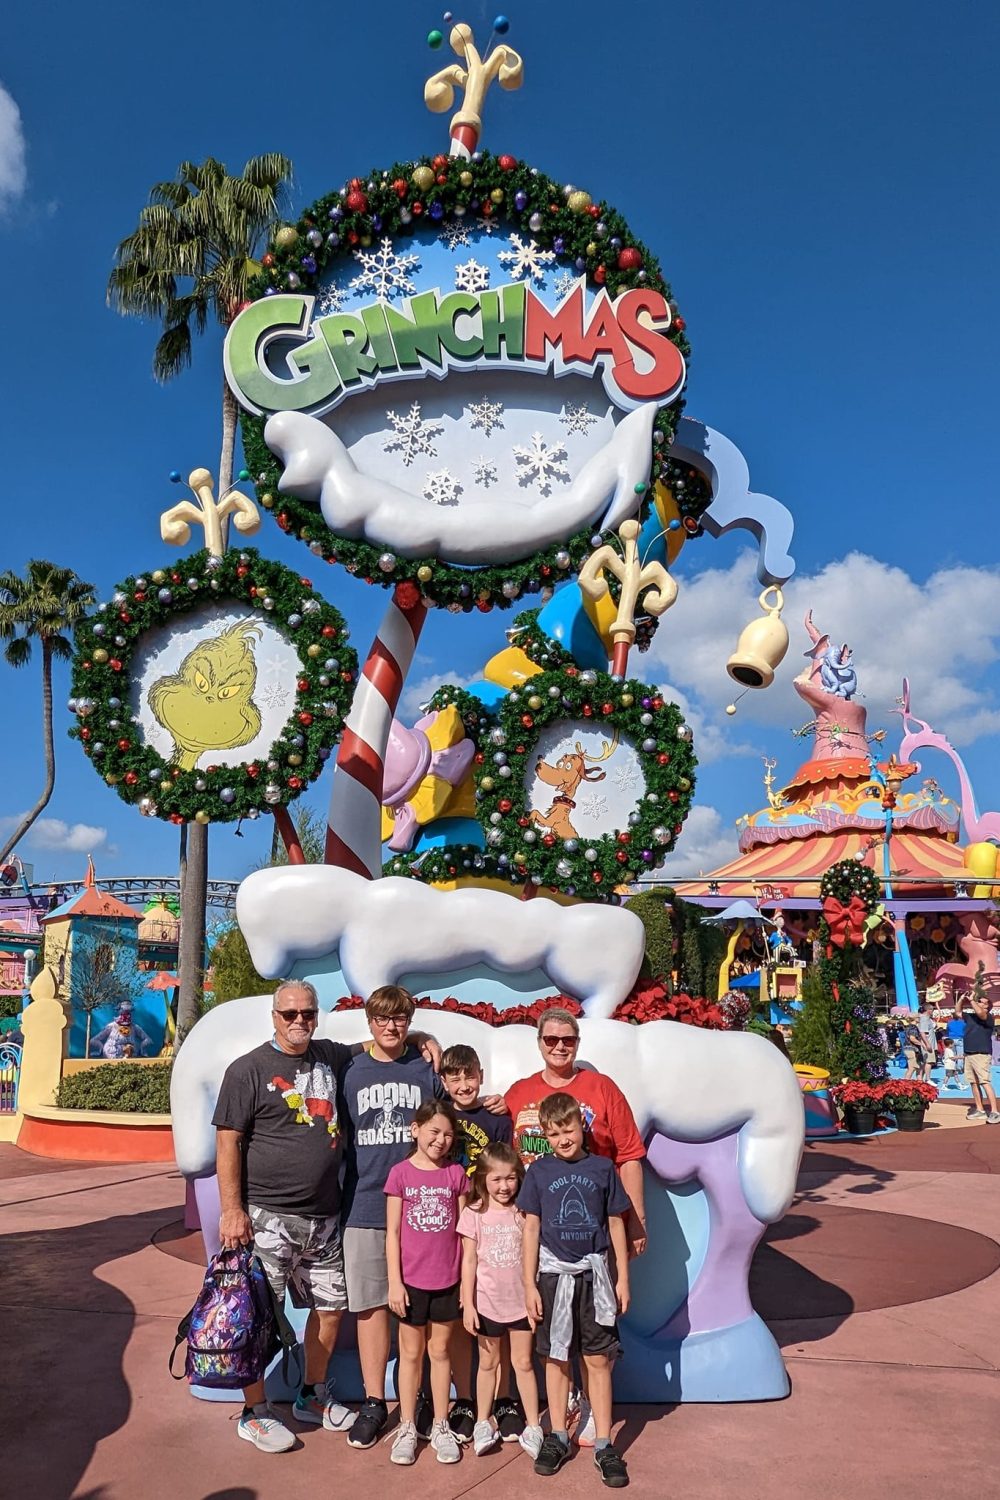 Kids with family in Seuss landing decorated for Christmas.